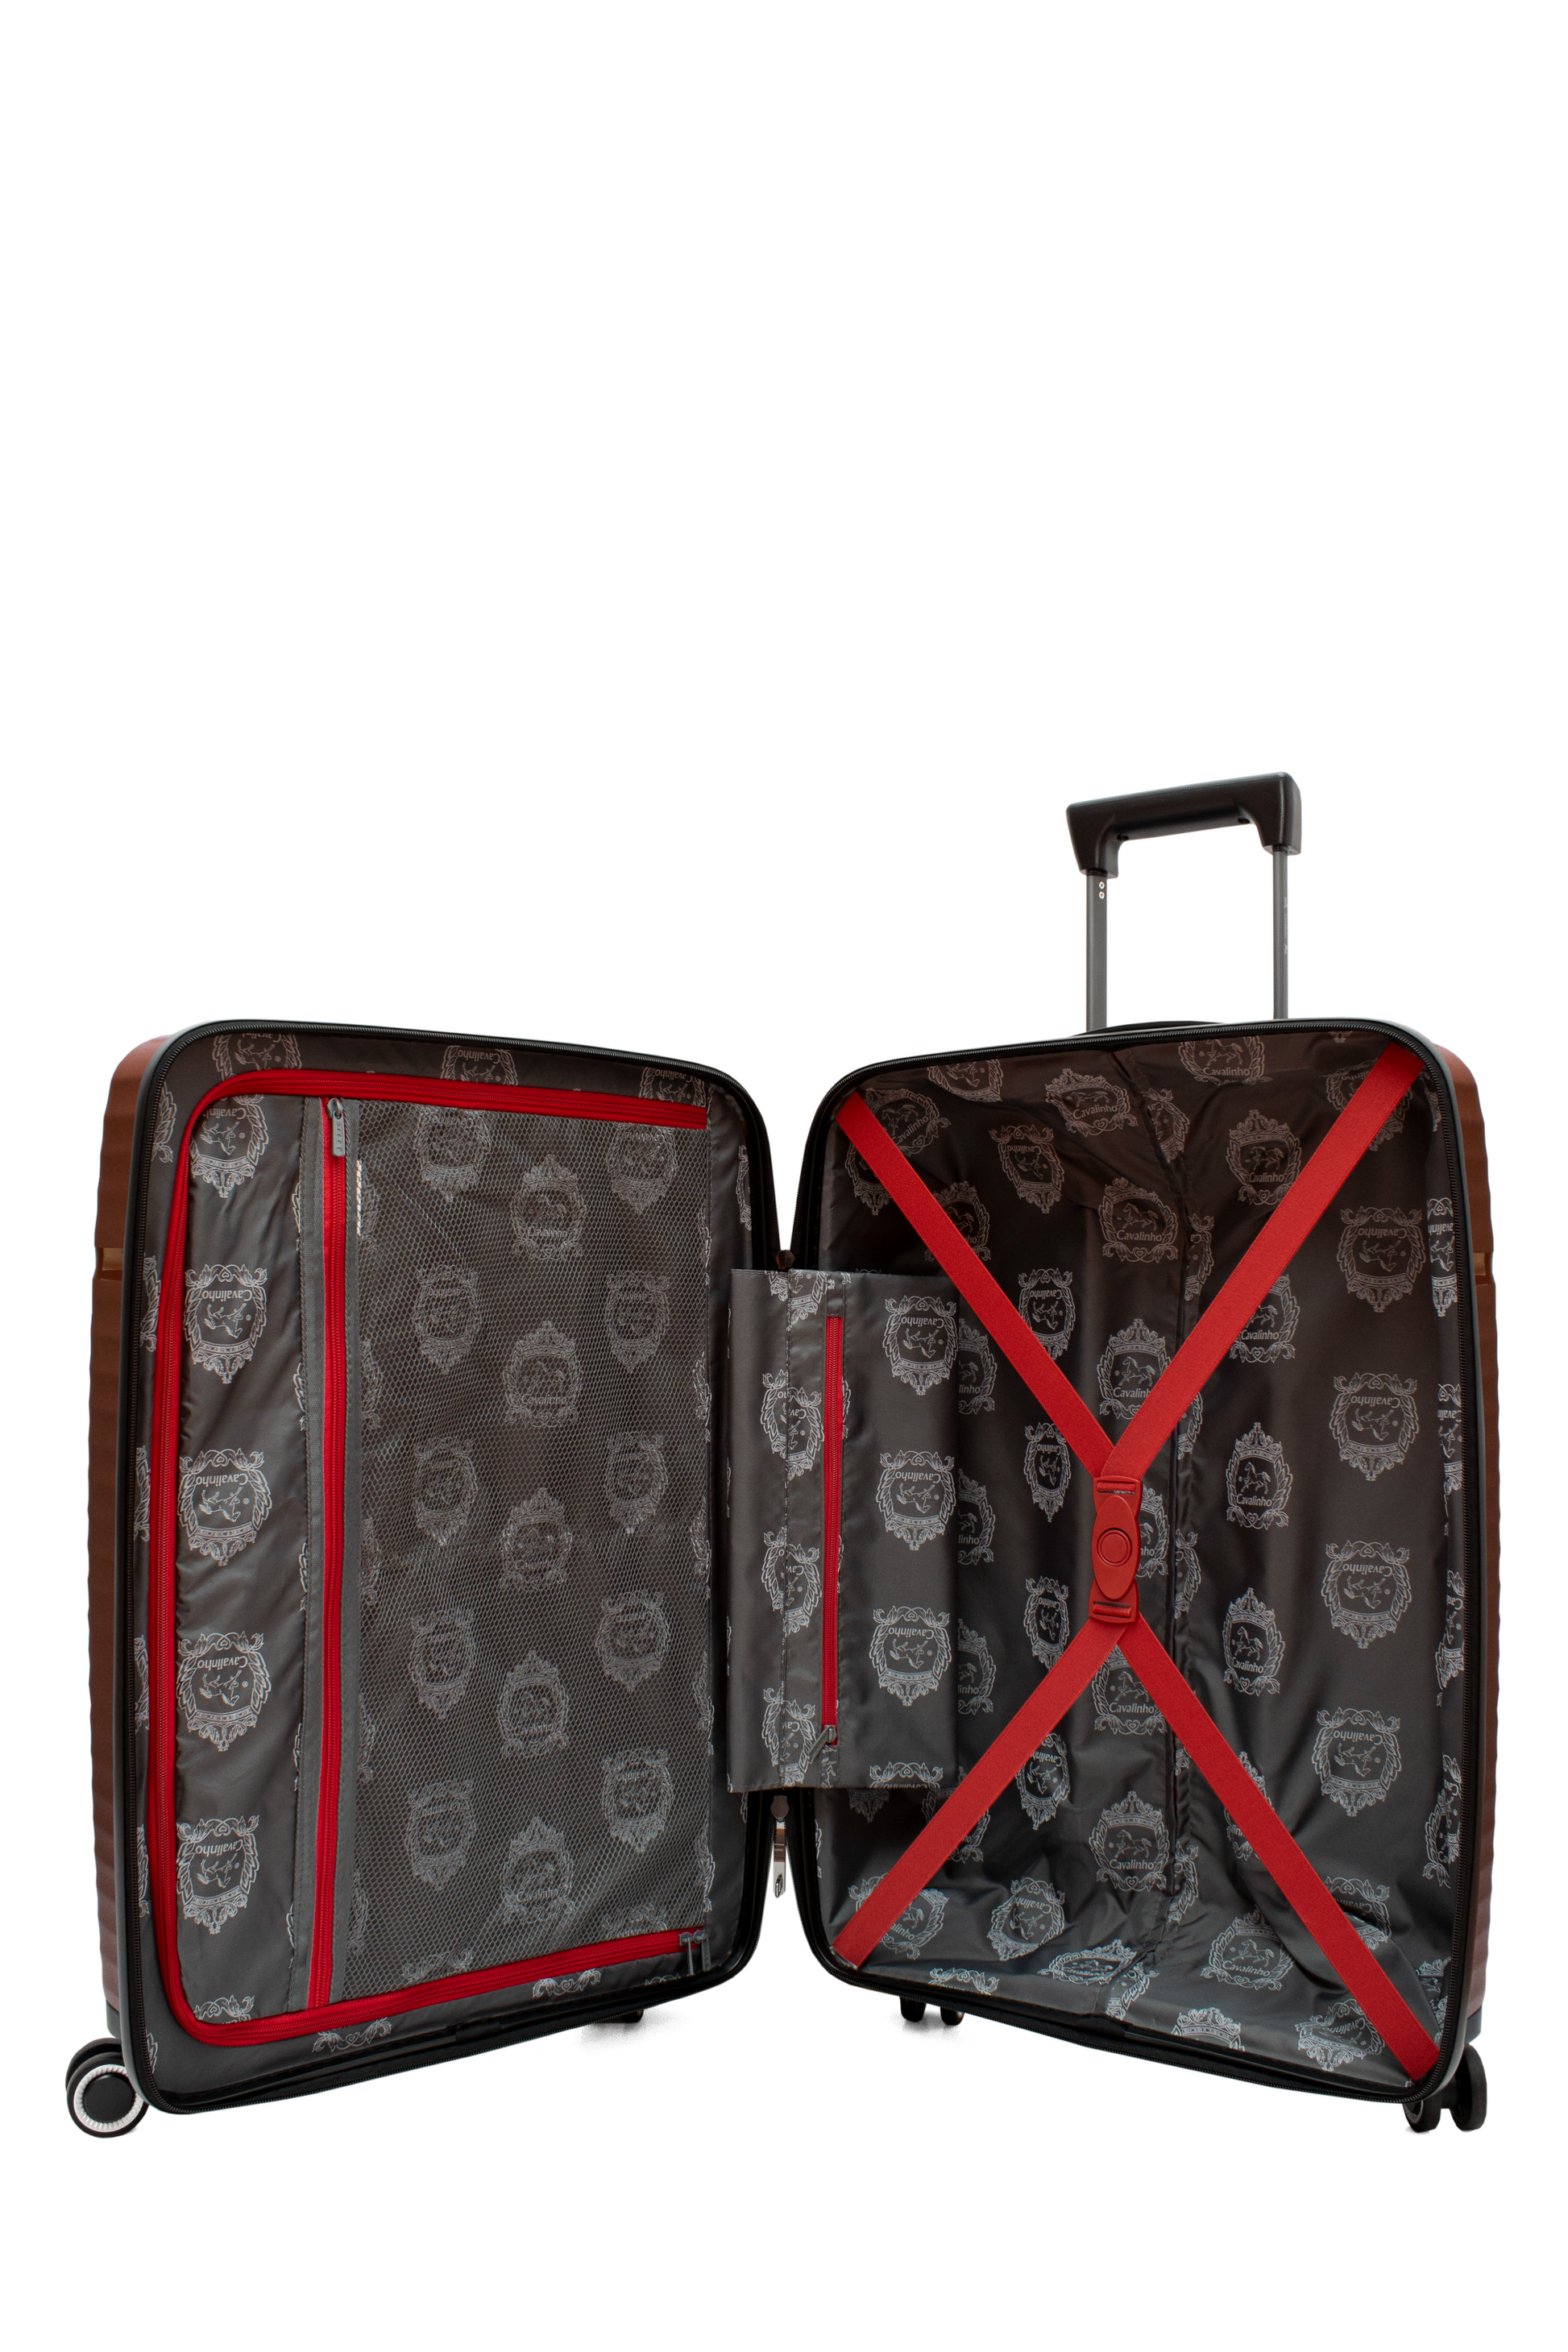 Cavalinho Check-in Hardside Luggage (24" or 28") - 24 inch IndianRed - 68010003.24.24_4